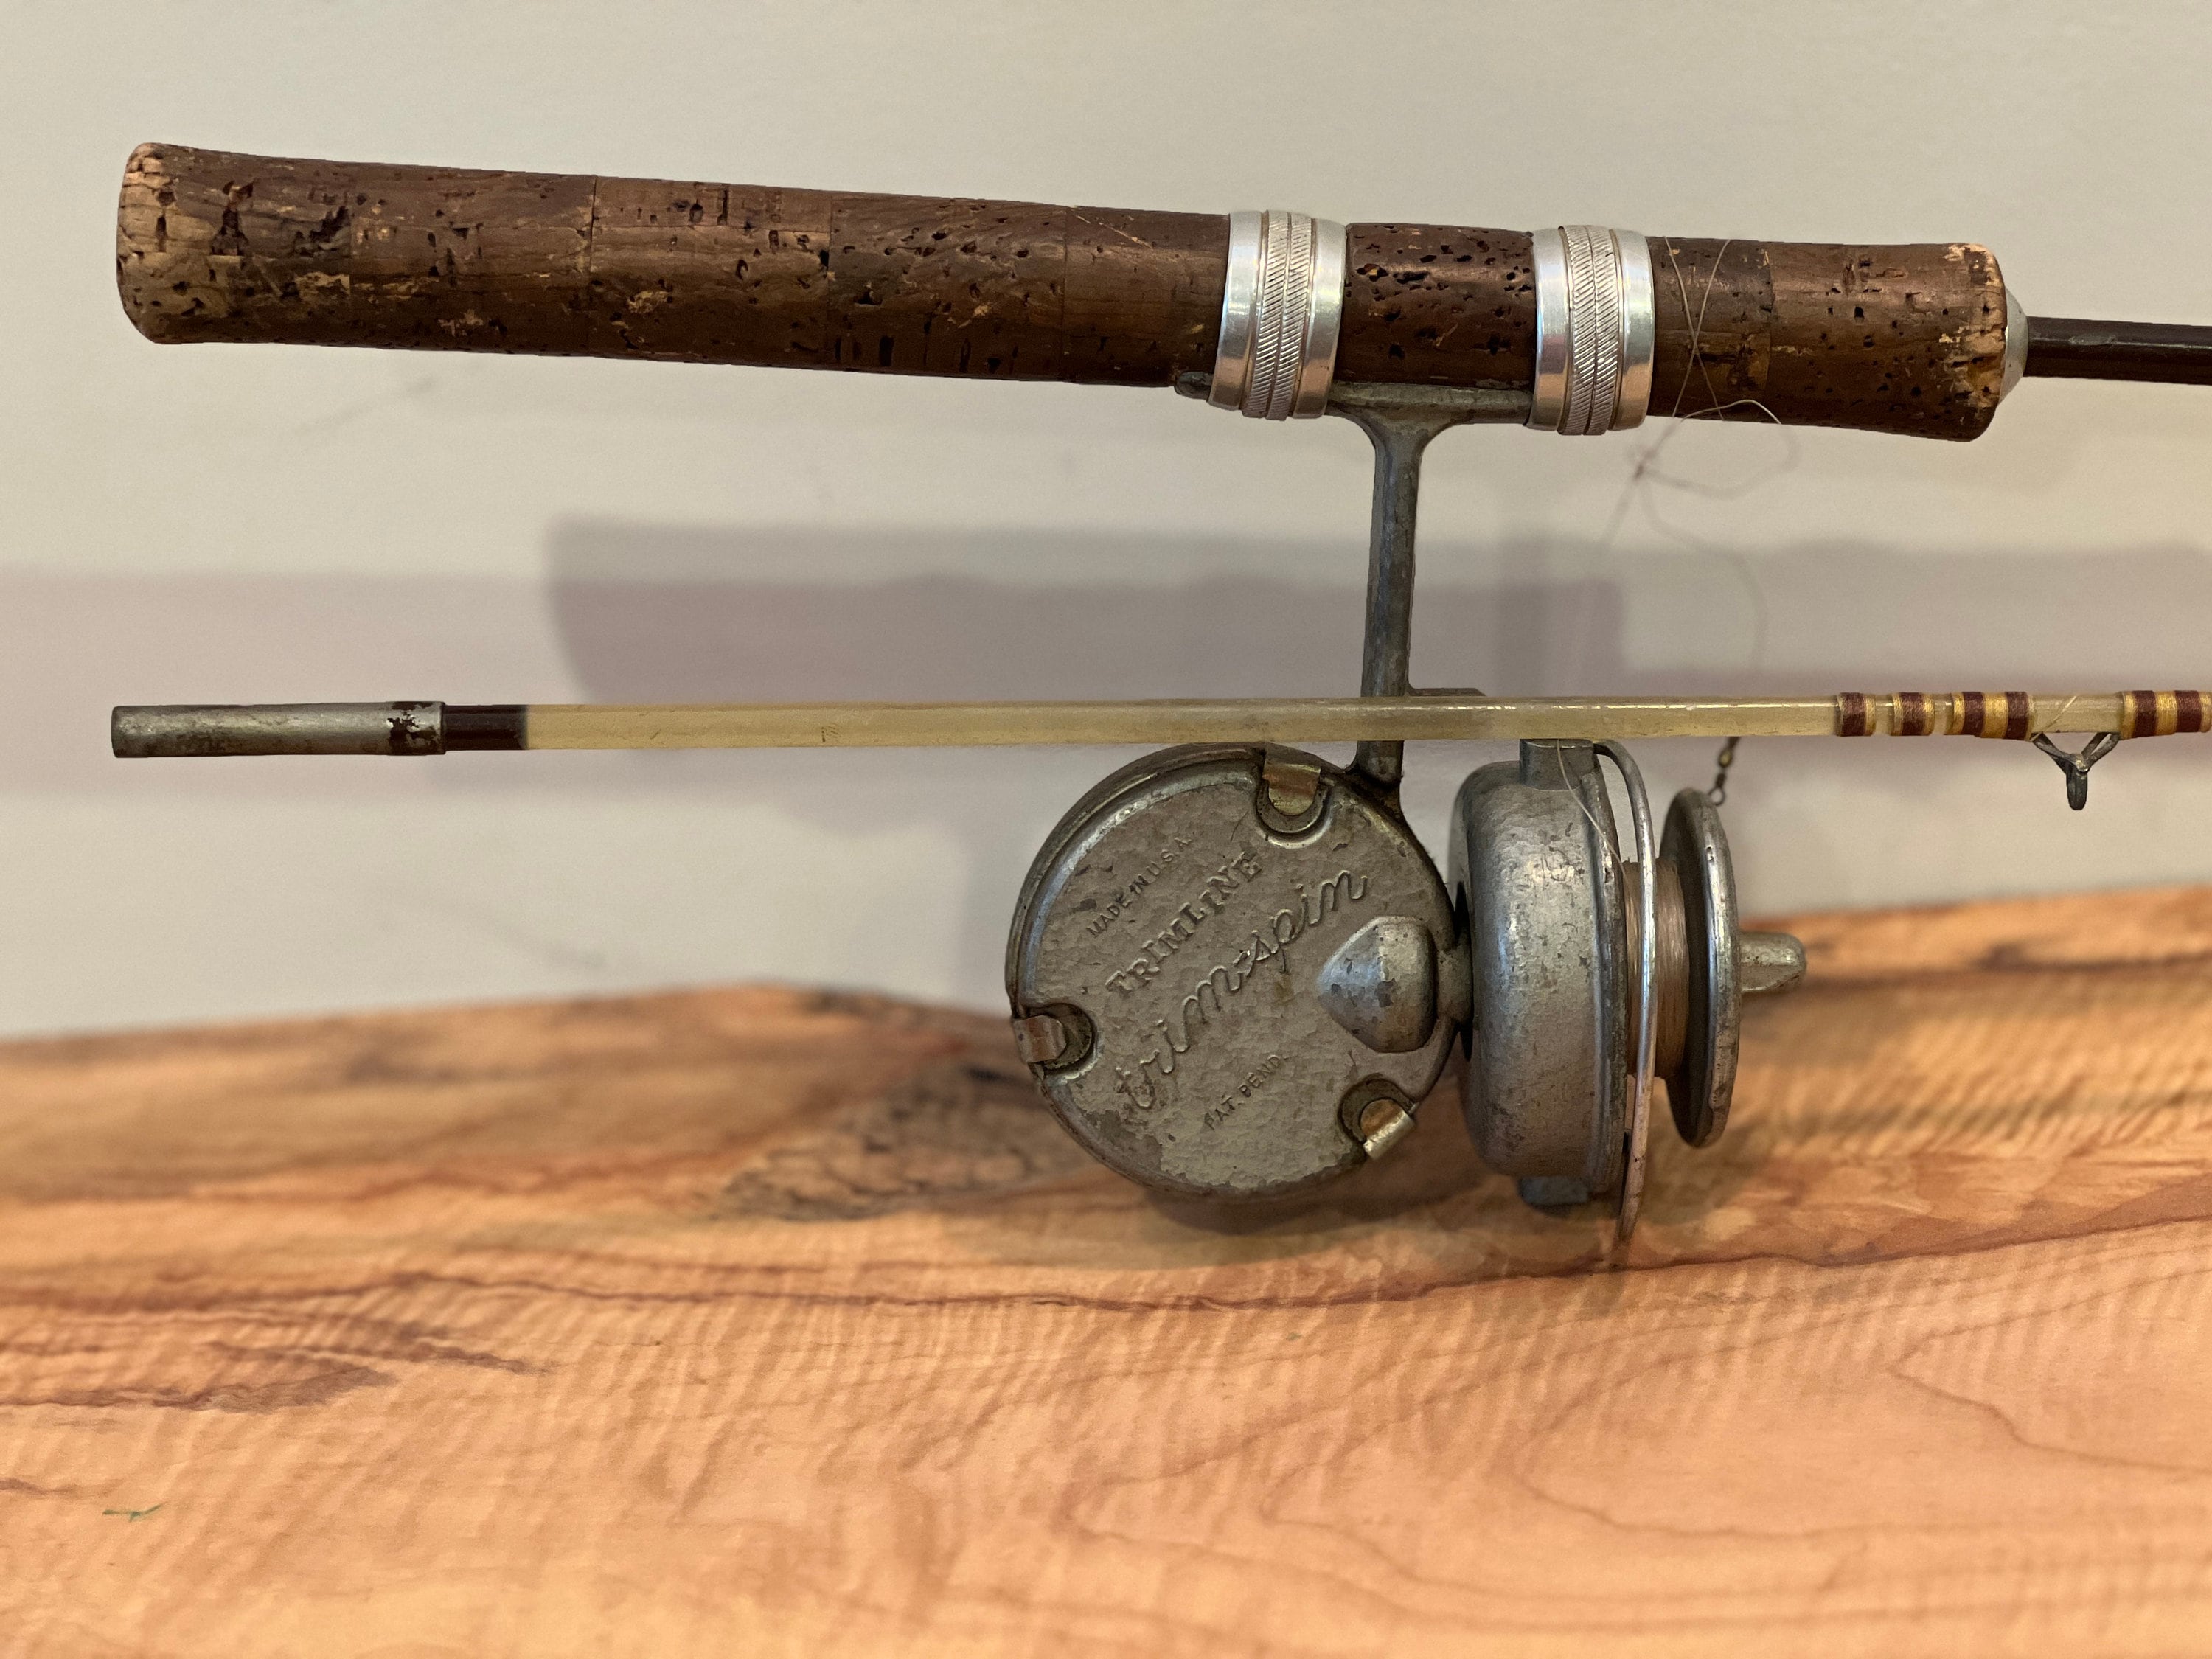 Vintage 1950s Trimline Trim-spin Reel and Great Lakes Solid Fiberglass  Fishing Rod